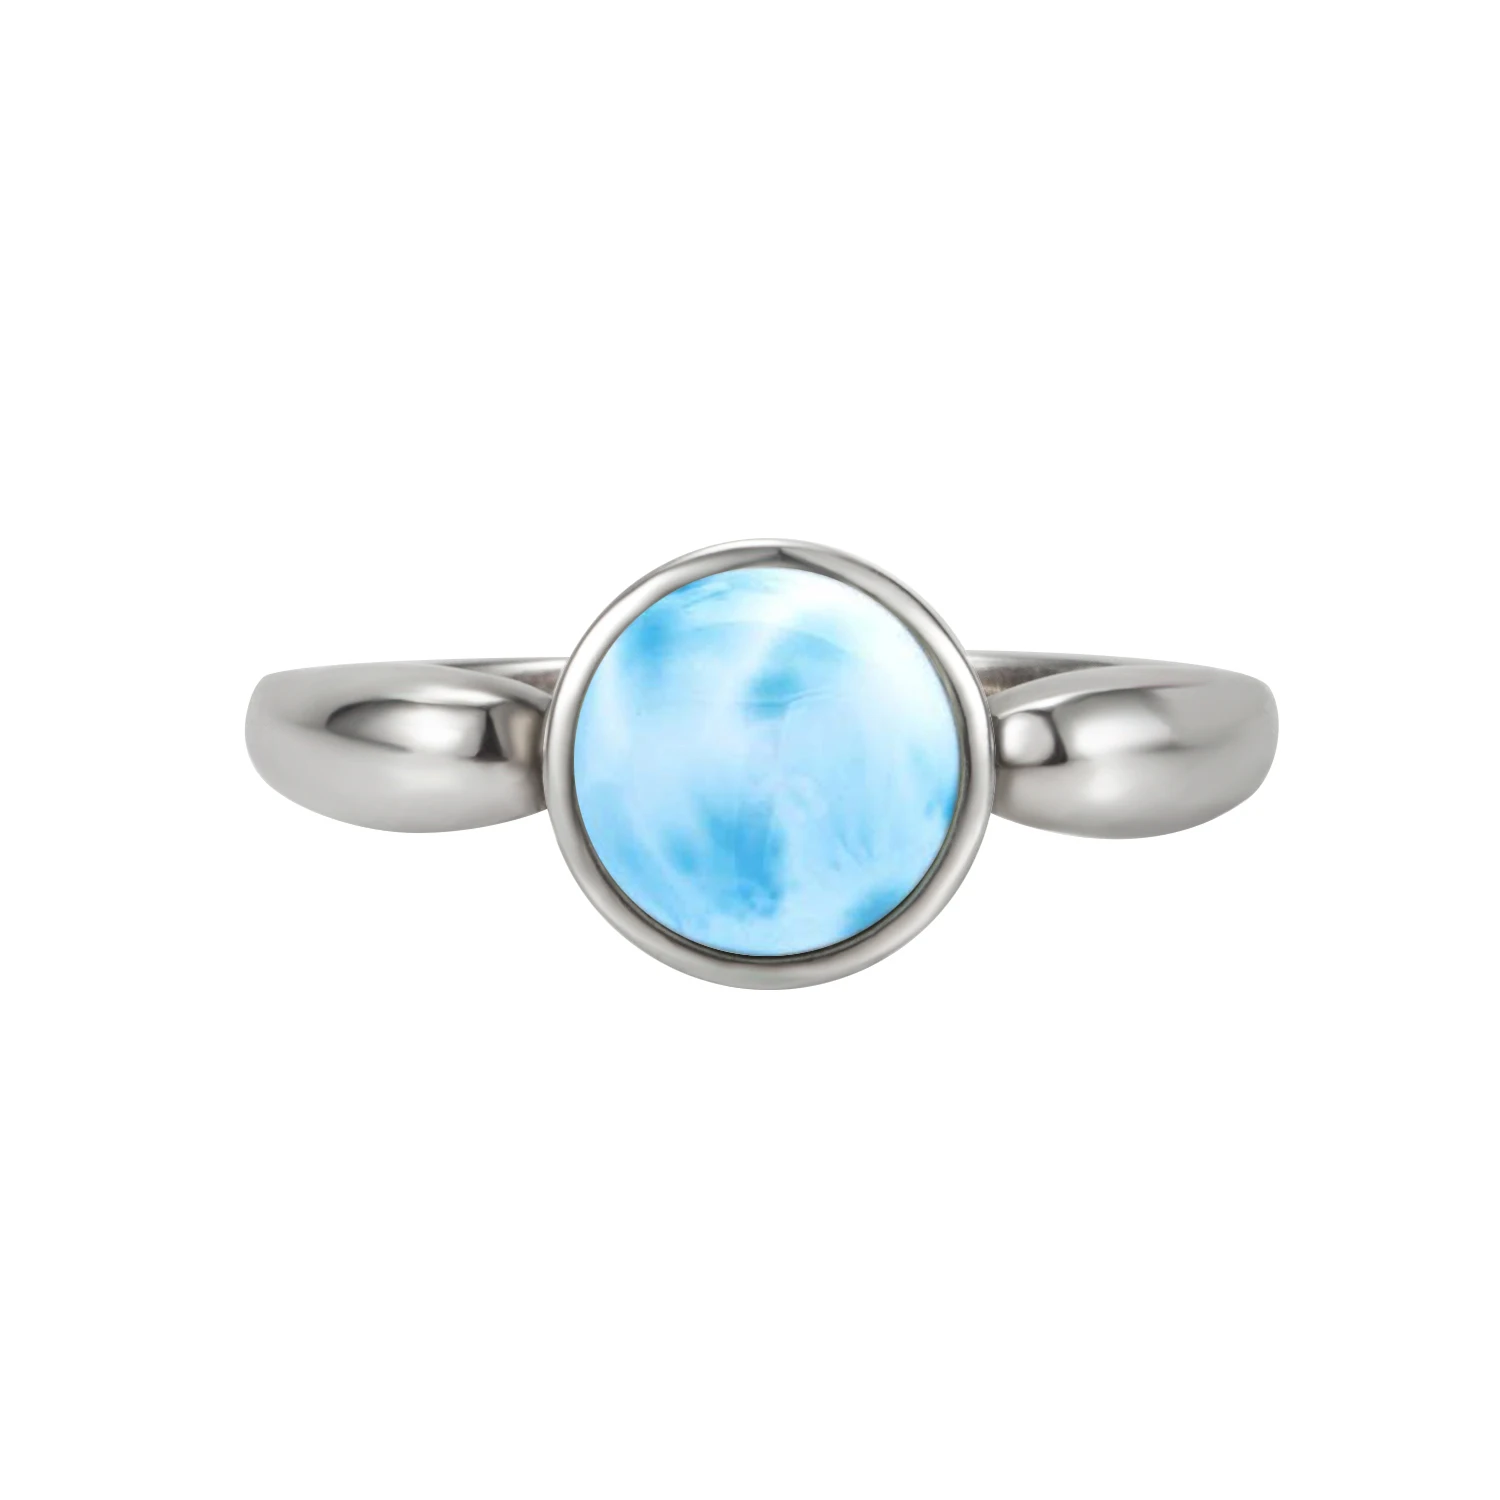 

Most Hots Simple Jewelry 925 Sterling Silver Jewelry Natural Blue Rings Round Shape Genuine Larimar Ring For Women Ladies Gift